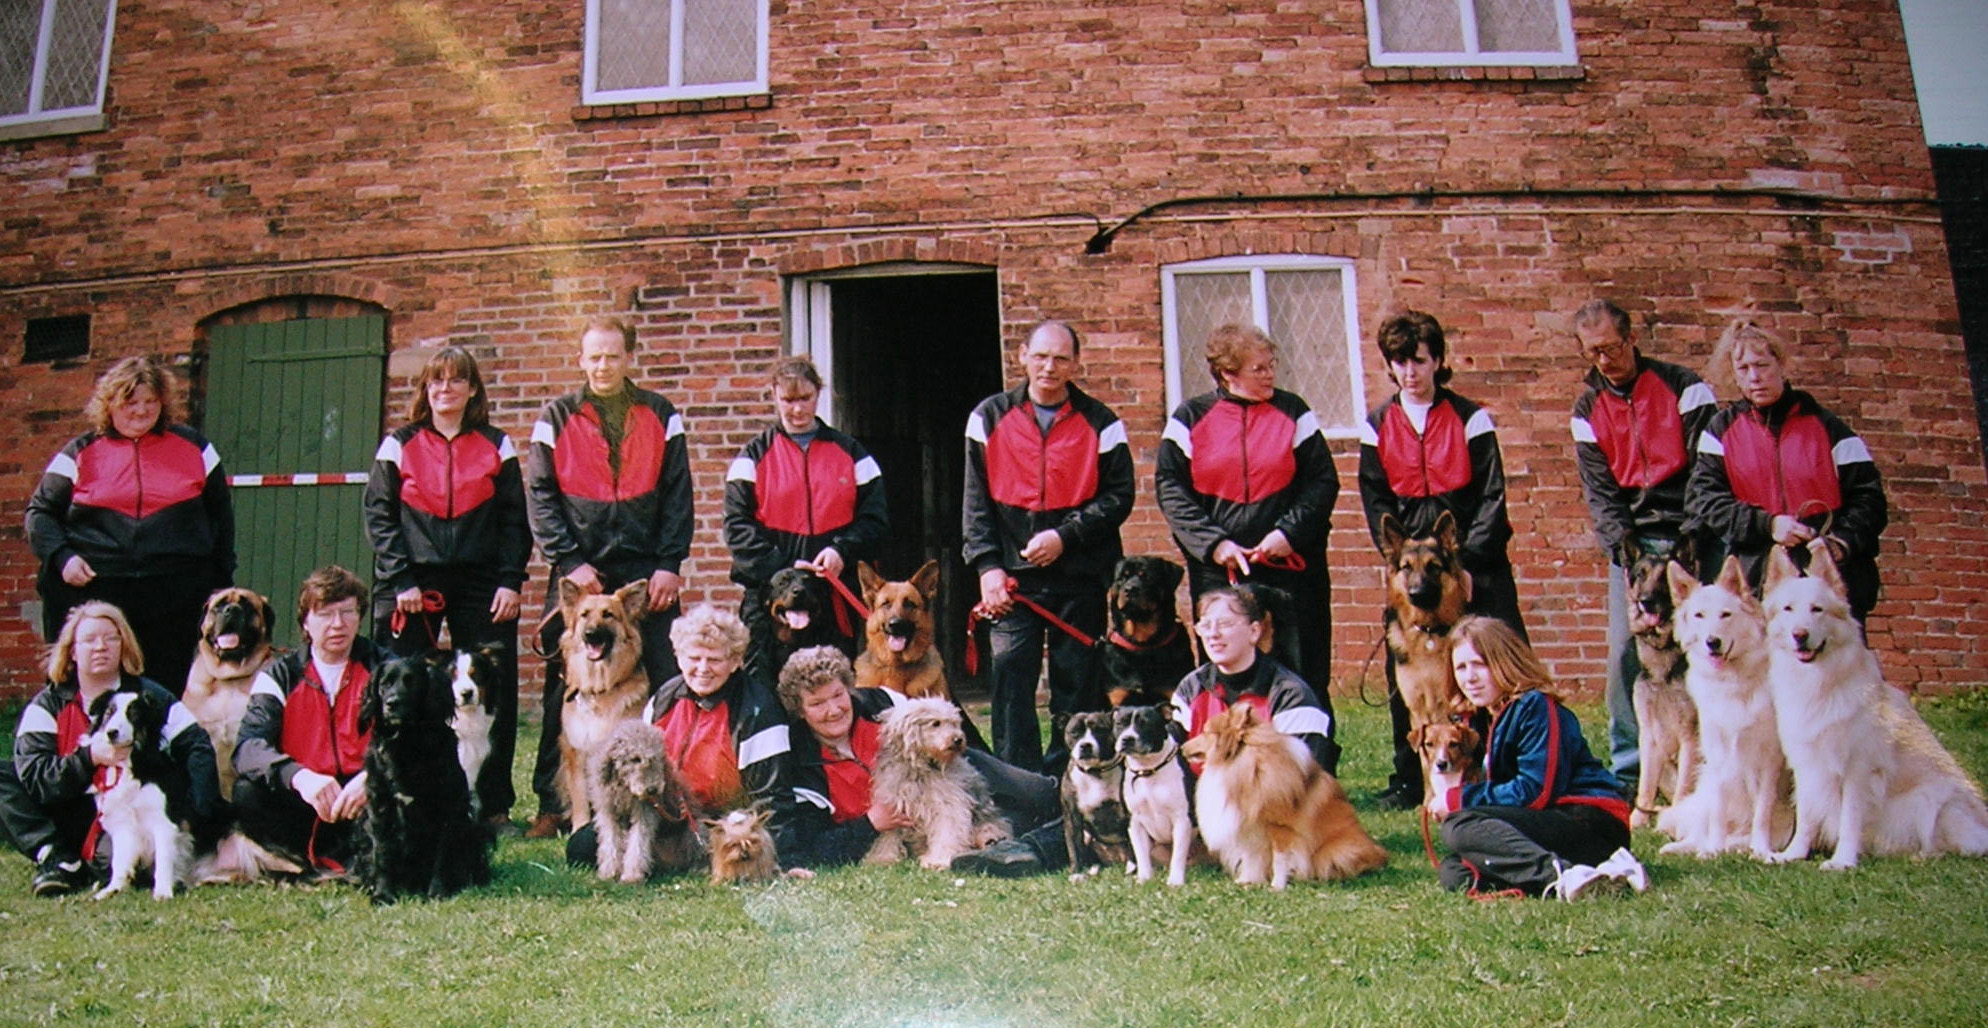 Most of the Dogs and handlers from one of the original Old Park Farm Dog Display Team